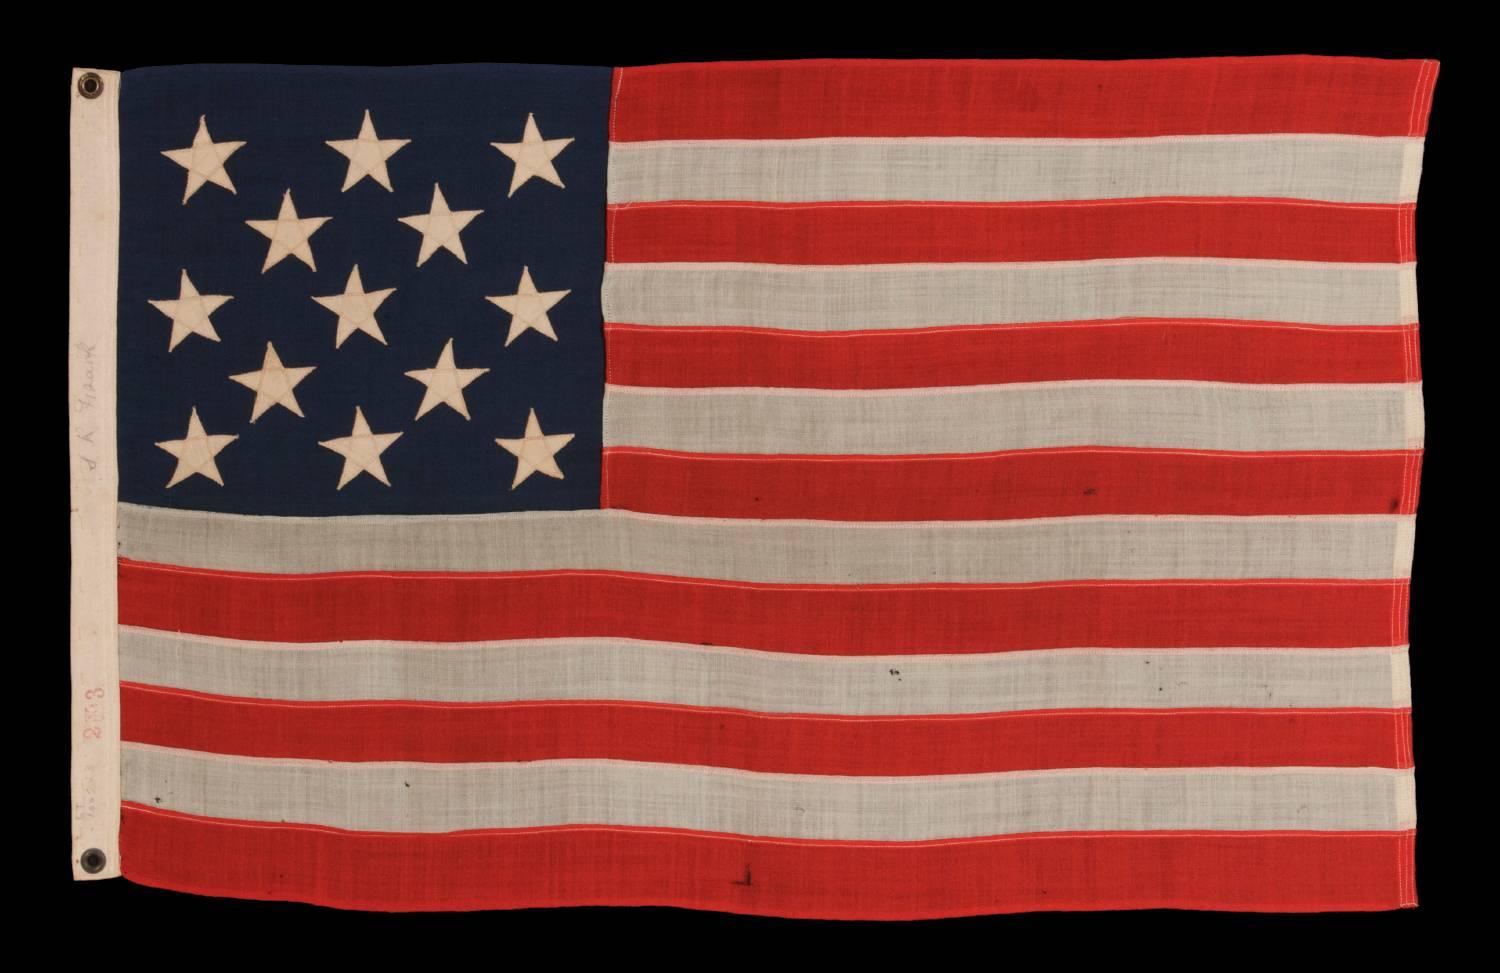 13 stars arranged in A 3-2-3-2-3 Pattern on a small-scale antique American flag made in the period between the last decade of the 19th century and the first quarter of the 20th century:

This 13 star antique American flag is of a type made during